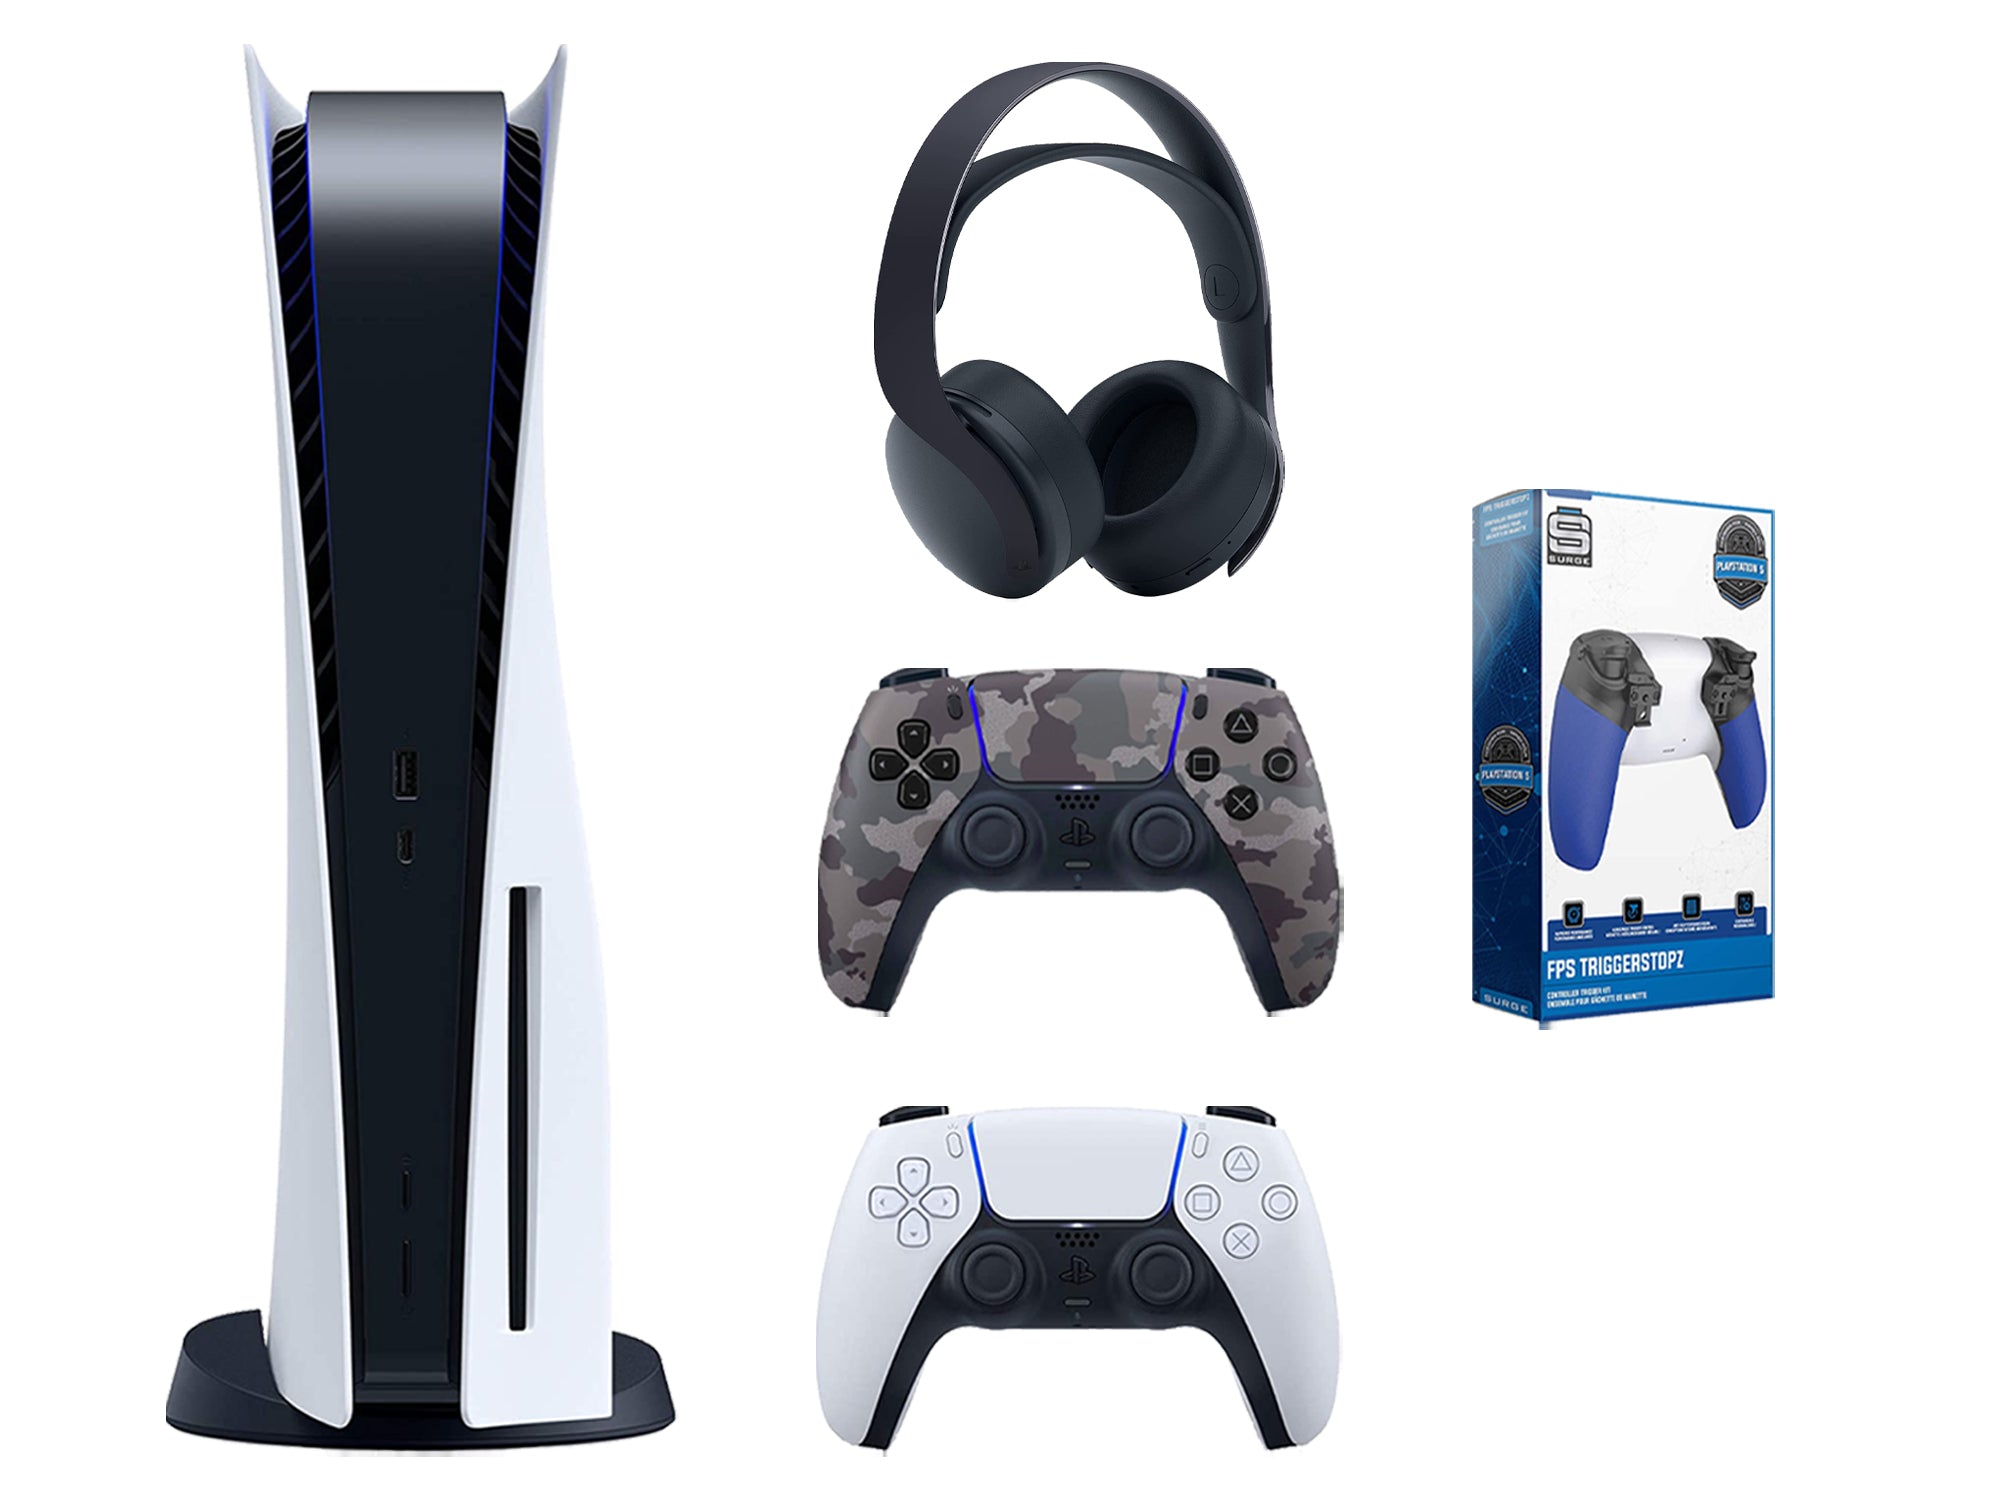 Sony Playstation 5 Disc Edition Bundle with Extra Gray Camo Controller, Black PULSE 3D Wireless Headset and Trigger Kit - Pro-Distributing